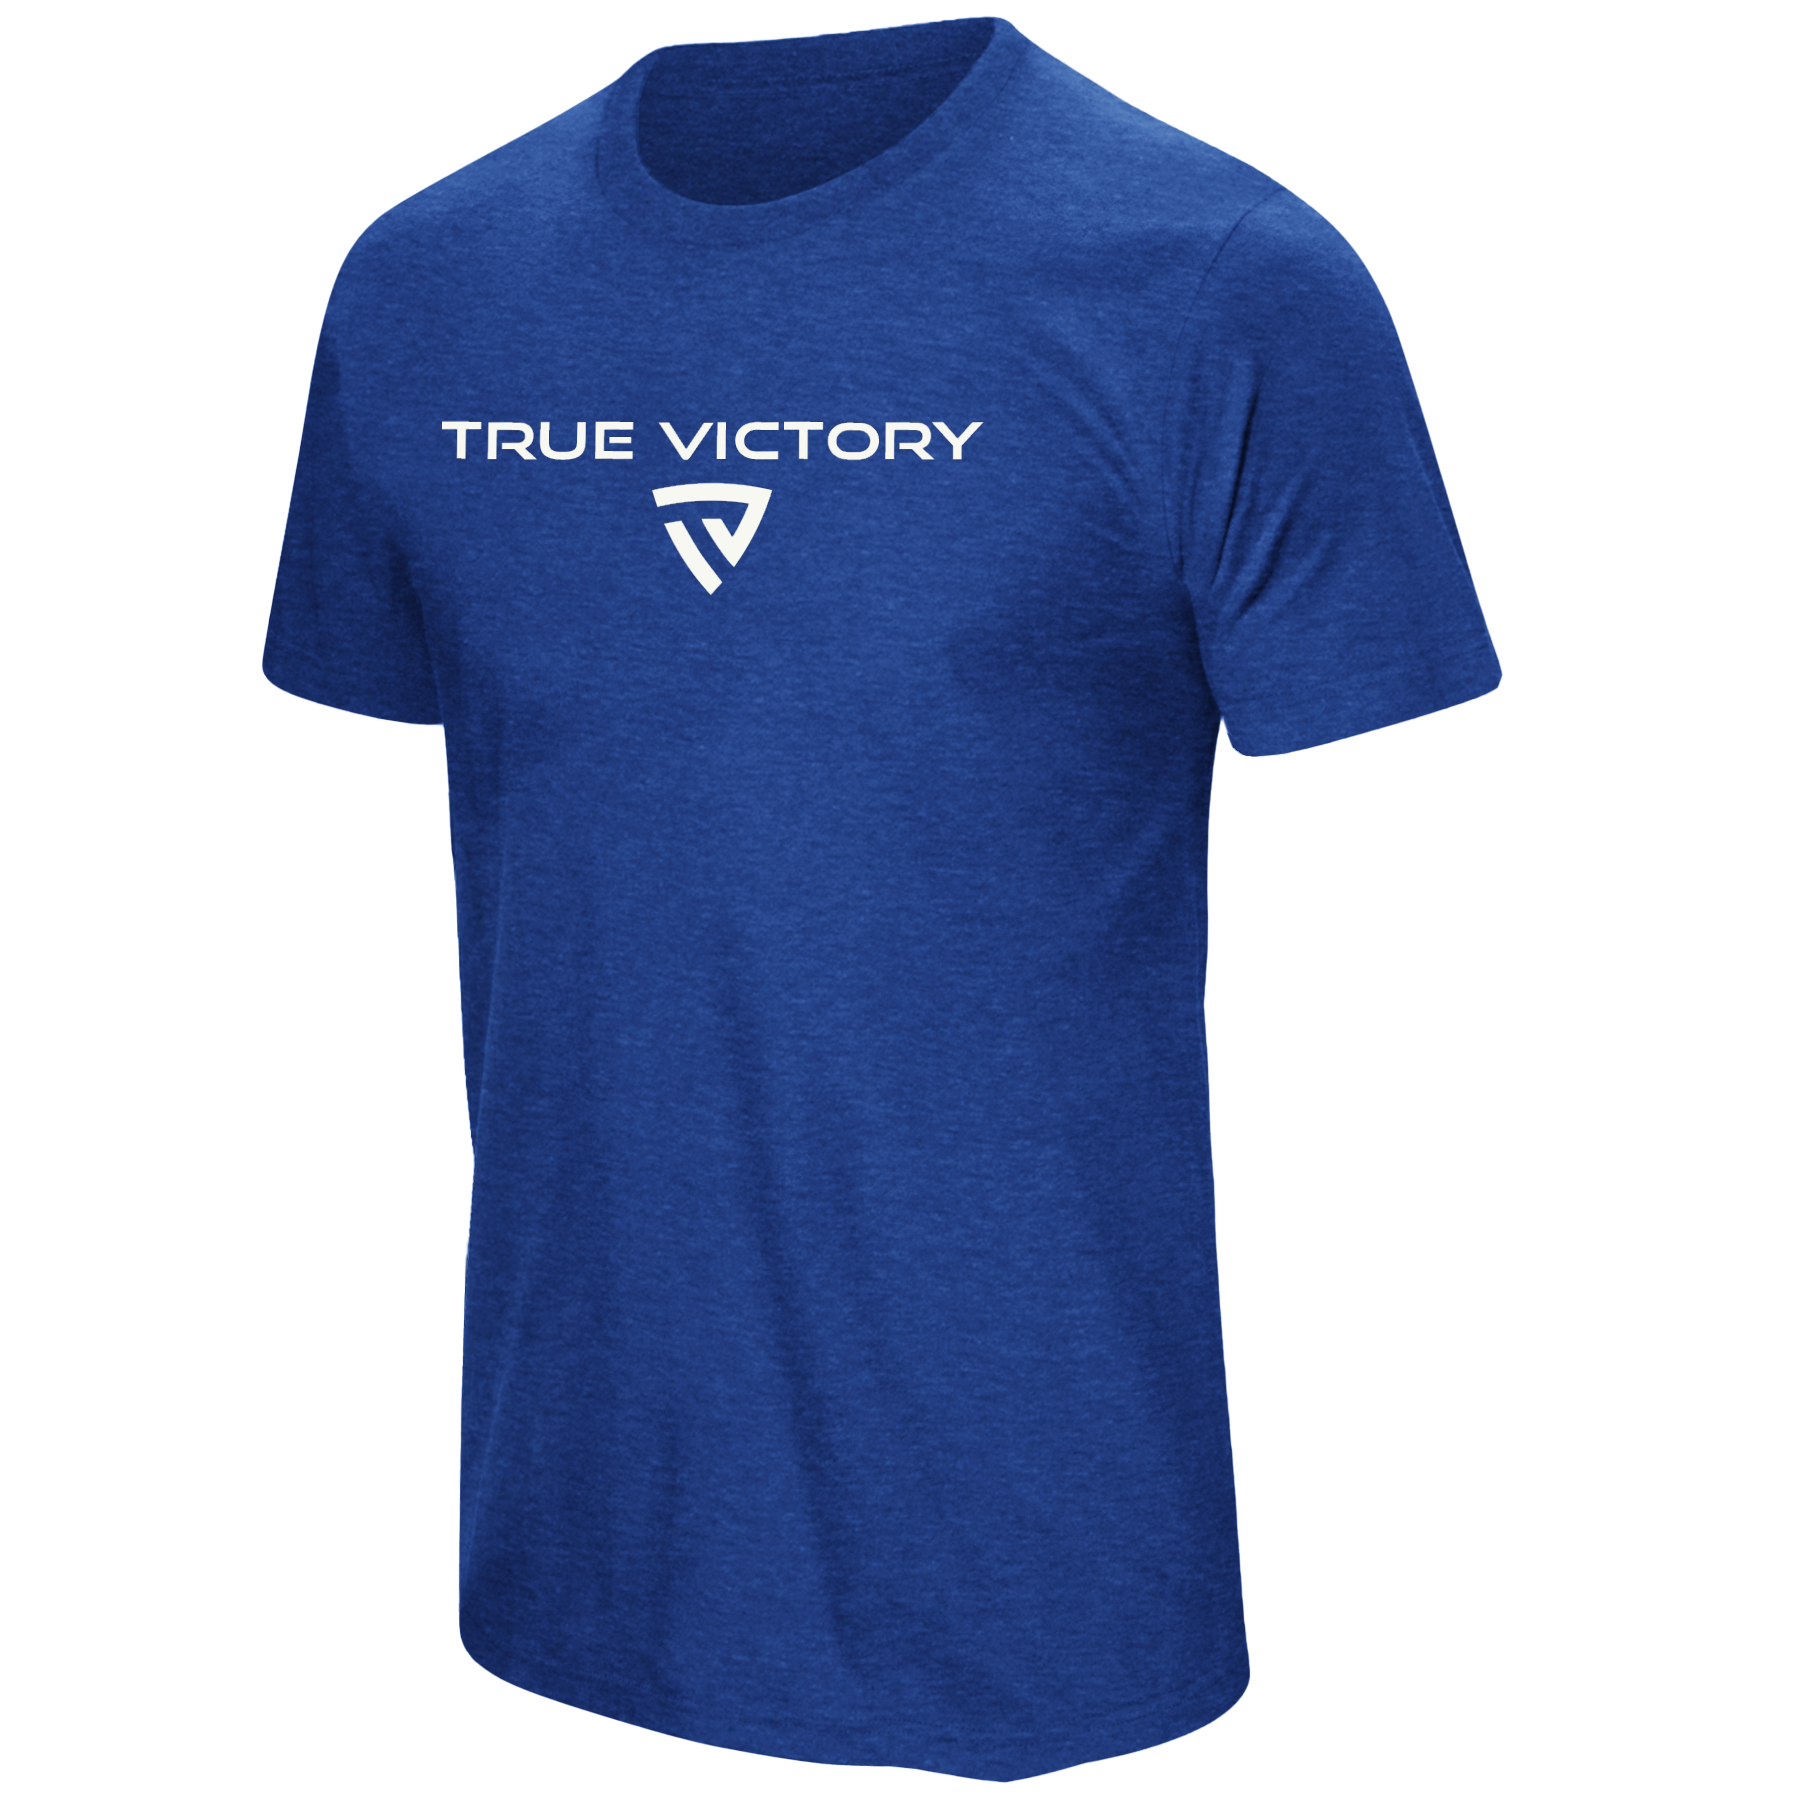 Men's Victorious Royal Tee